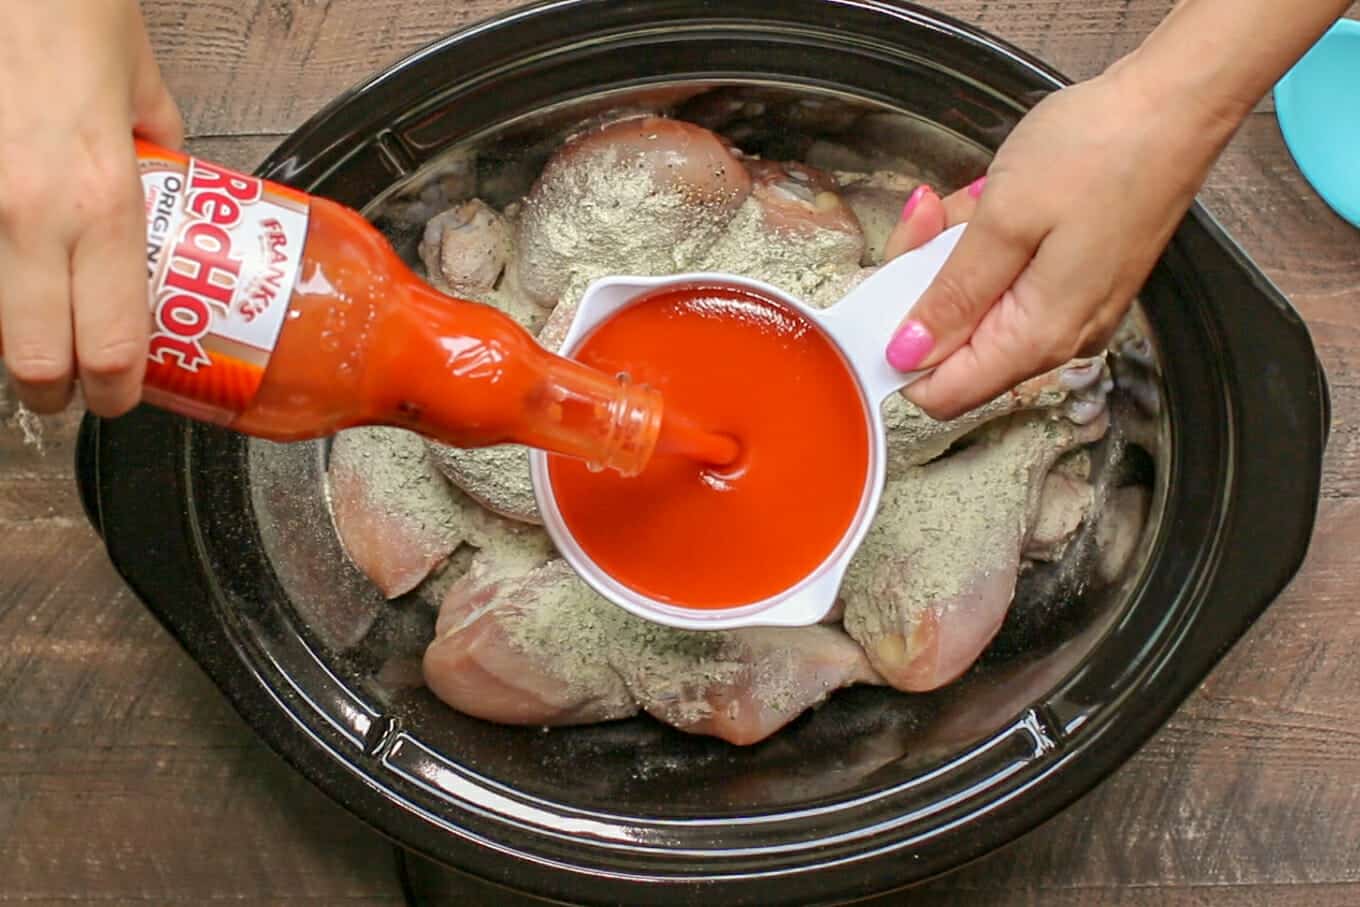 buffalo sauce being pour into a measuring cup over drumsticks in the slow cooker